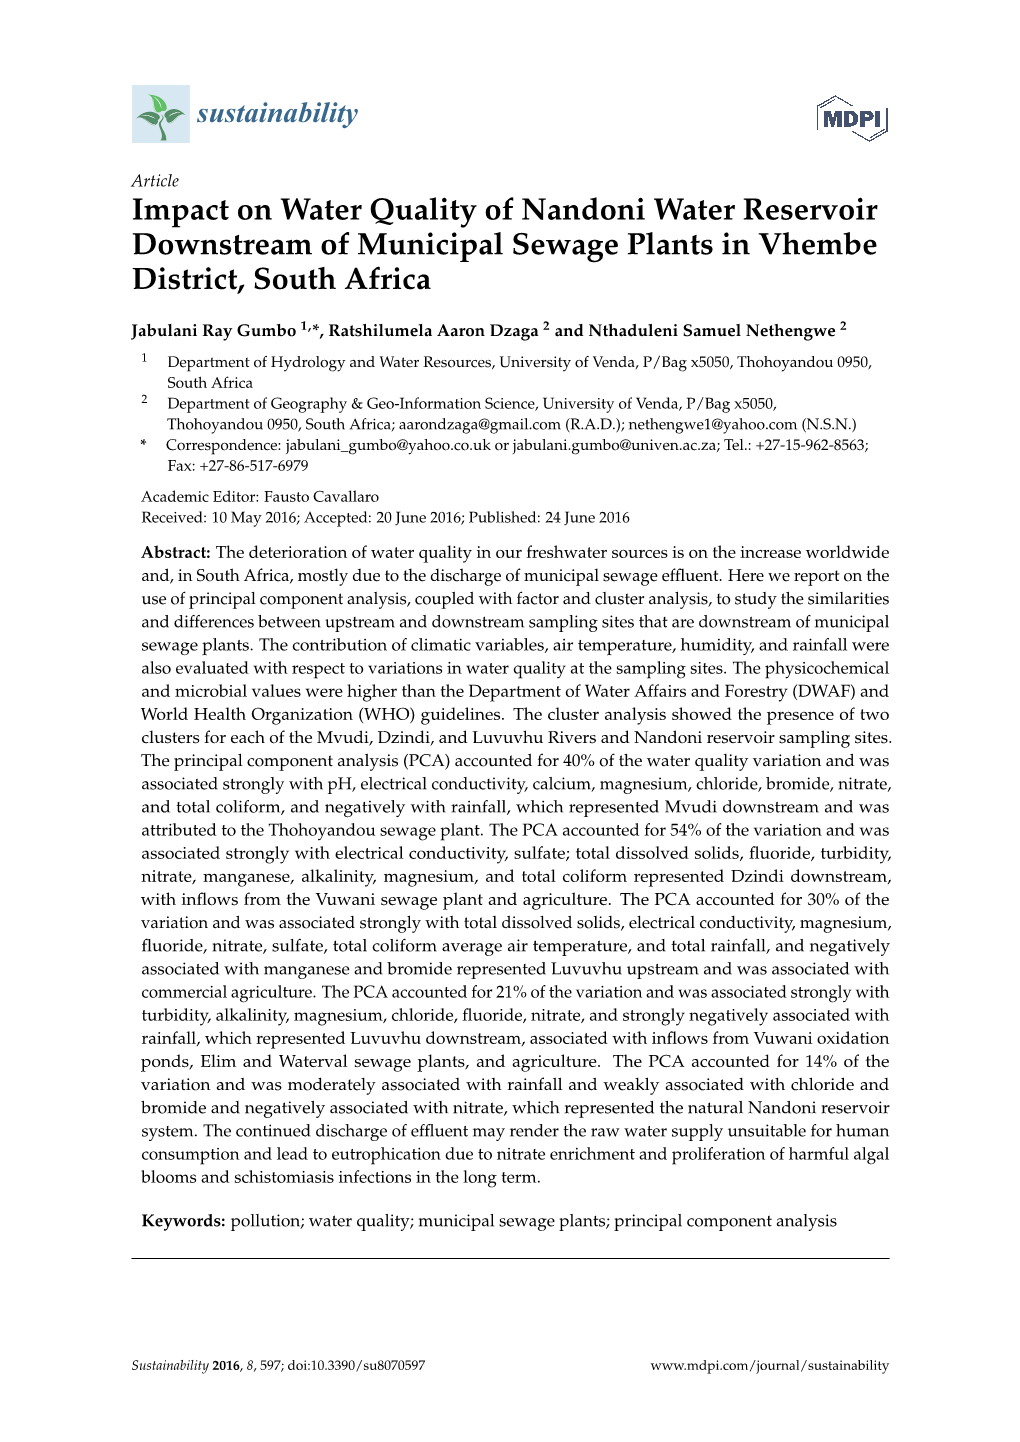 Impact on Water Quality of Nandoni Water Reservoir Downstream of Municipal Sewage Plants in Vhembe District, South Africa